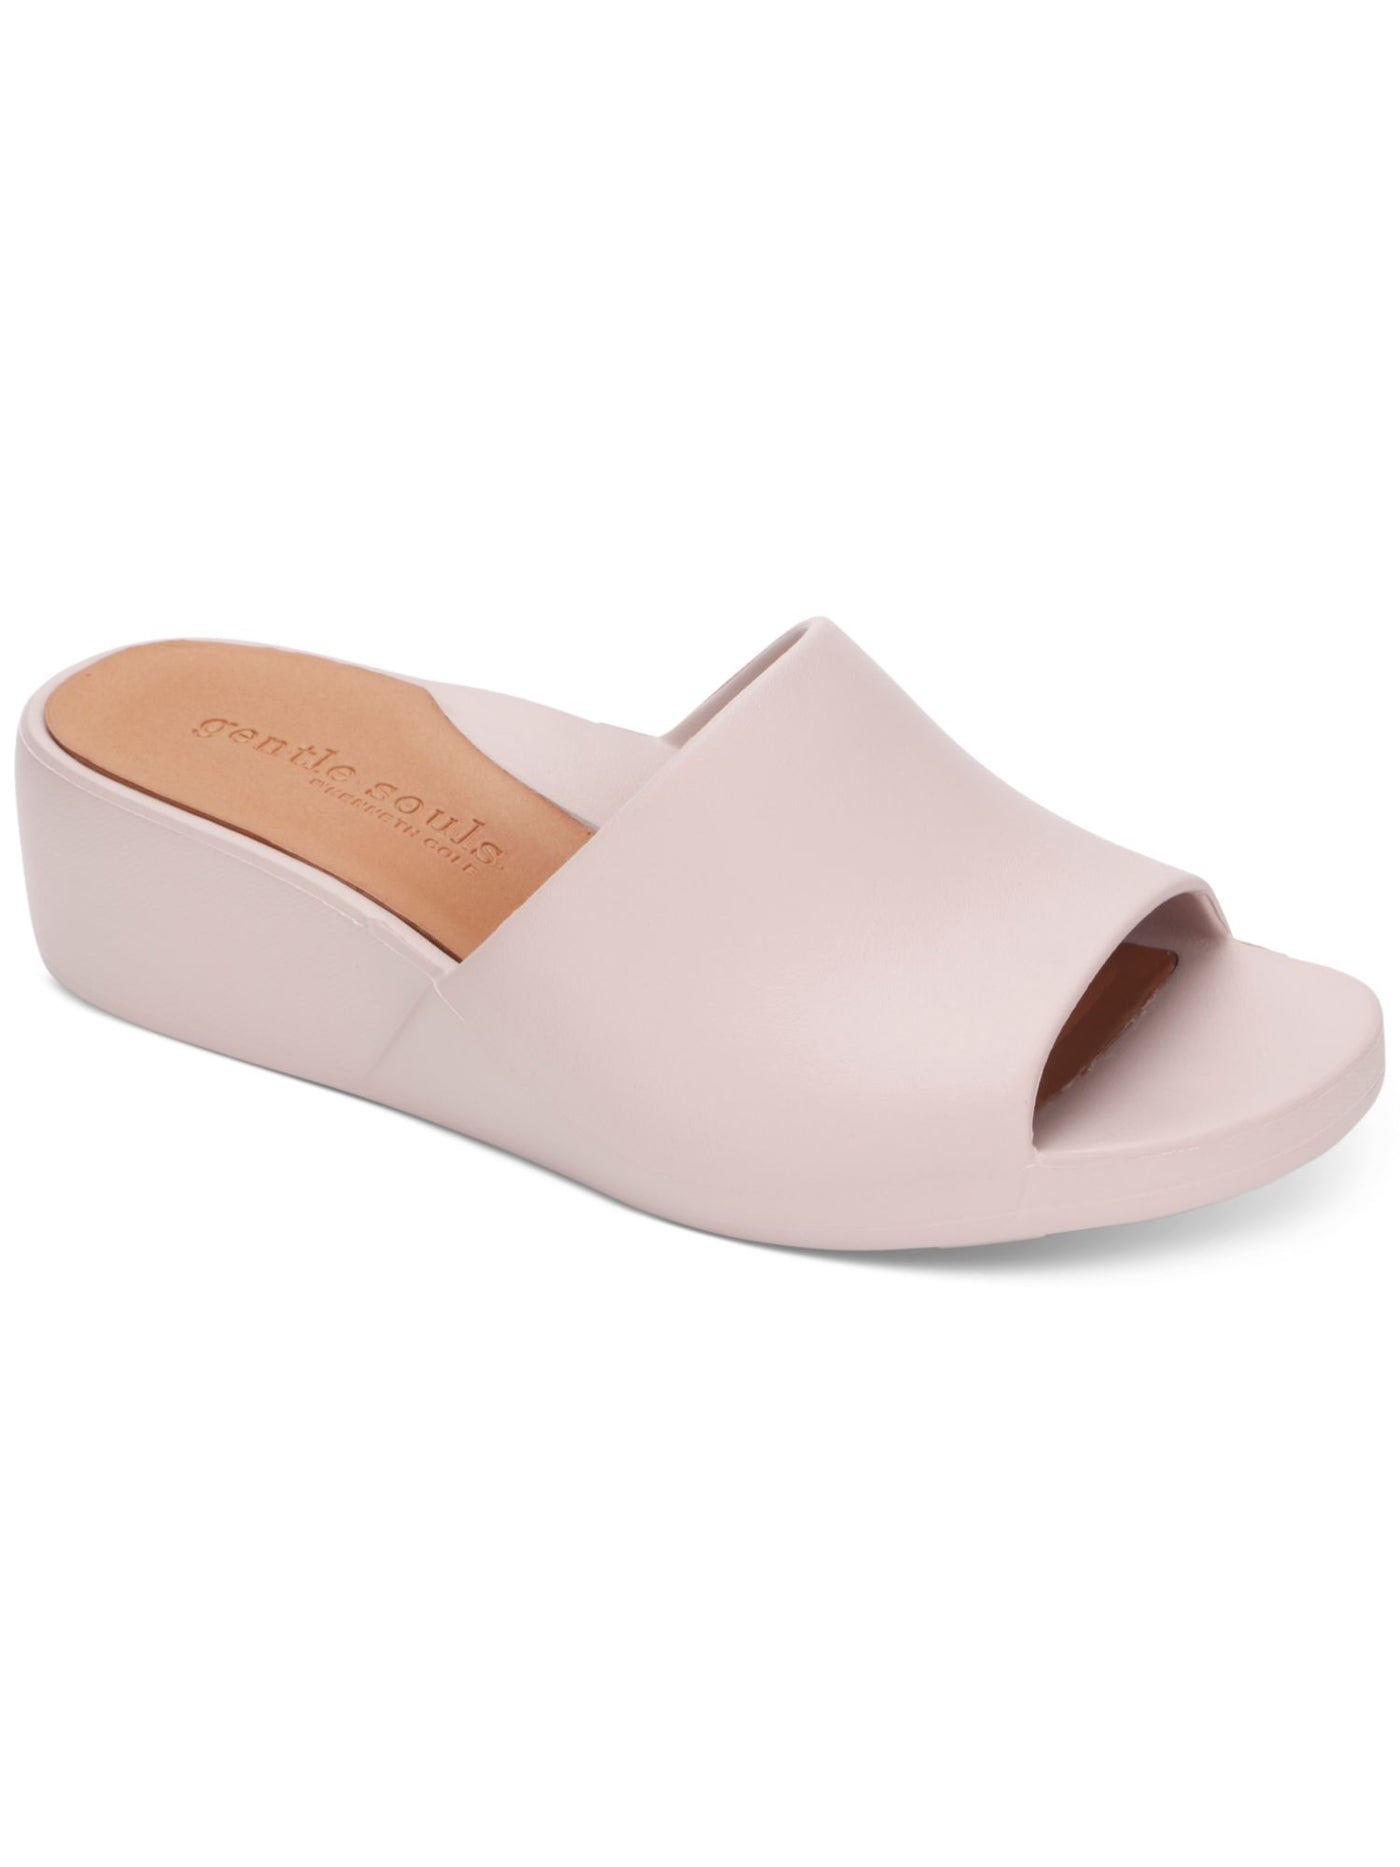 GENTLE SOULS KENNETH COLE Womens Pink Cushioned Arch Support Gisele Round Toe Wedge Slip On Slide Sandals Shoes 10